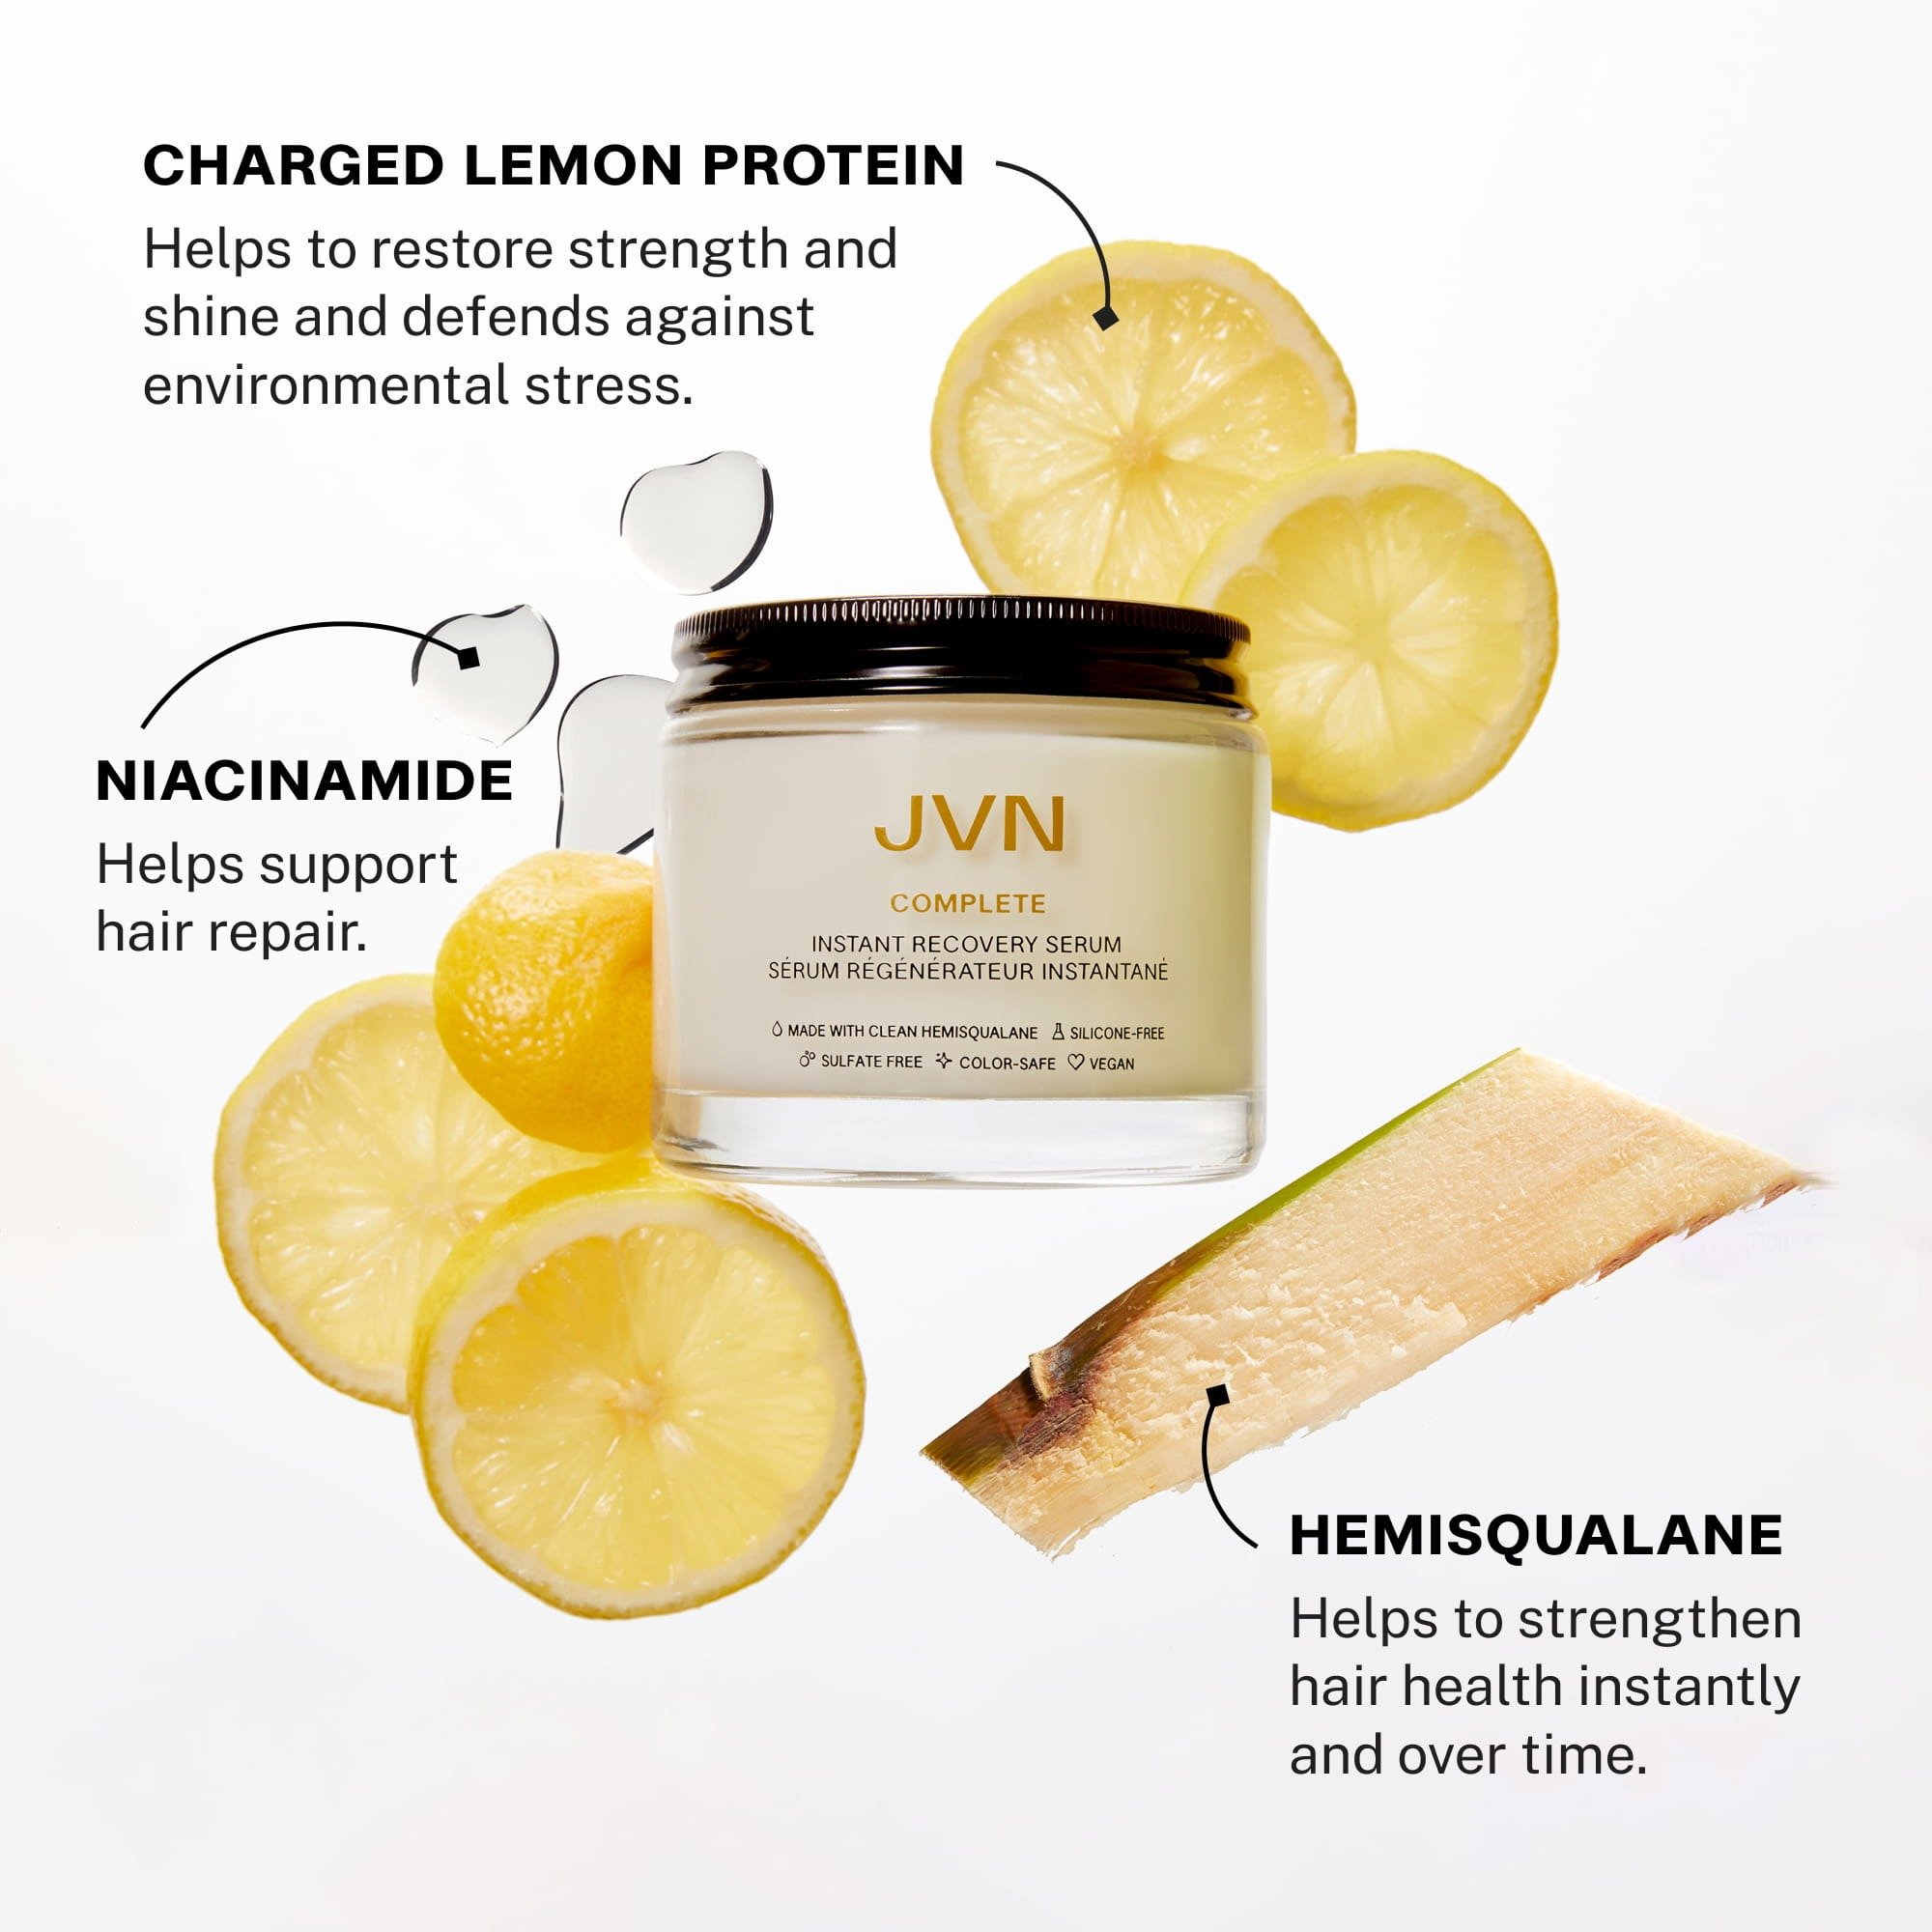 Instant Recovery Serum heat protectant glass jar surrounded by ingredients. Hemisqualane helps to strengthen hair health instantly and over time; Niacinamide helps support hair health; Charged Lemon Protein helps to restore strength and shine and defends against environmental stress.